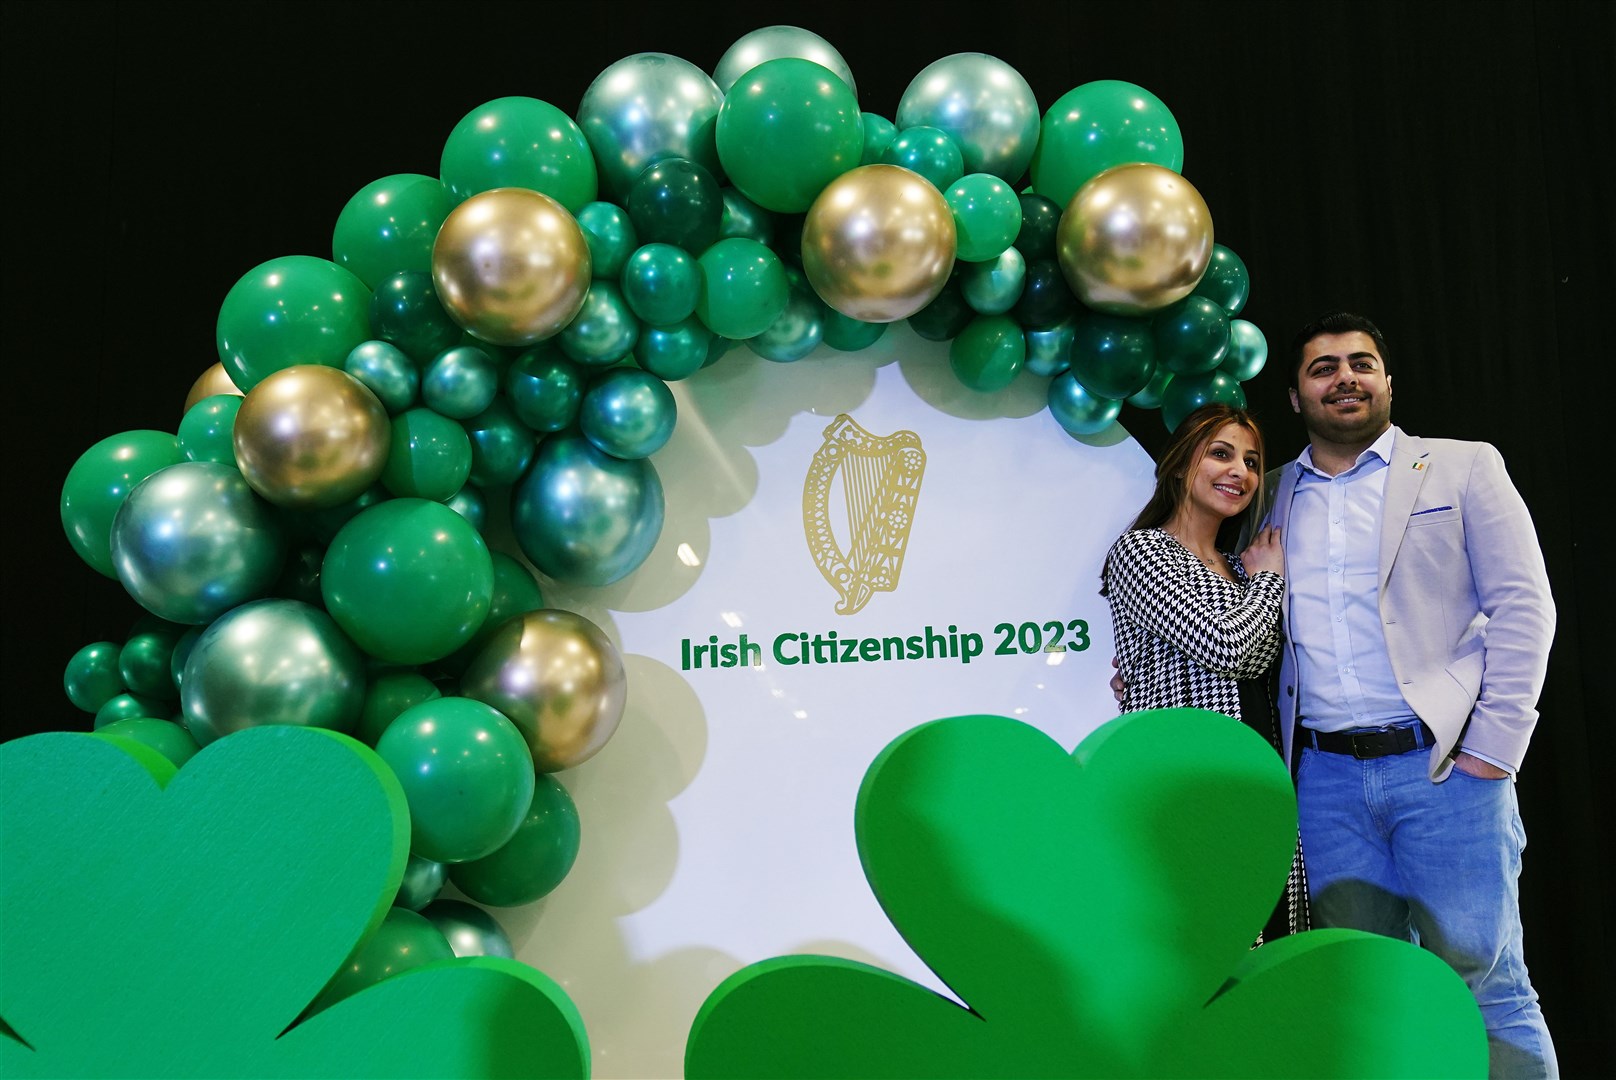 The first in-person Citizenship Ceremony to take place in more than four years was held in March, with 1,500 new Irish citizens welcomed during the event at the RDS in Dublin (Brian Lawless/PA)